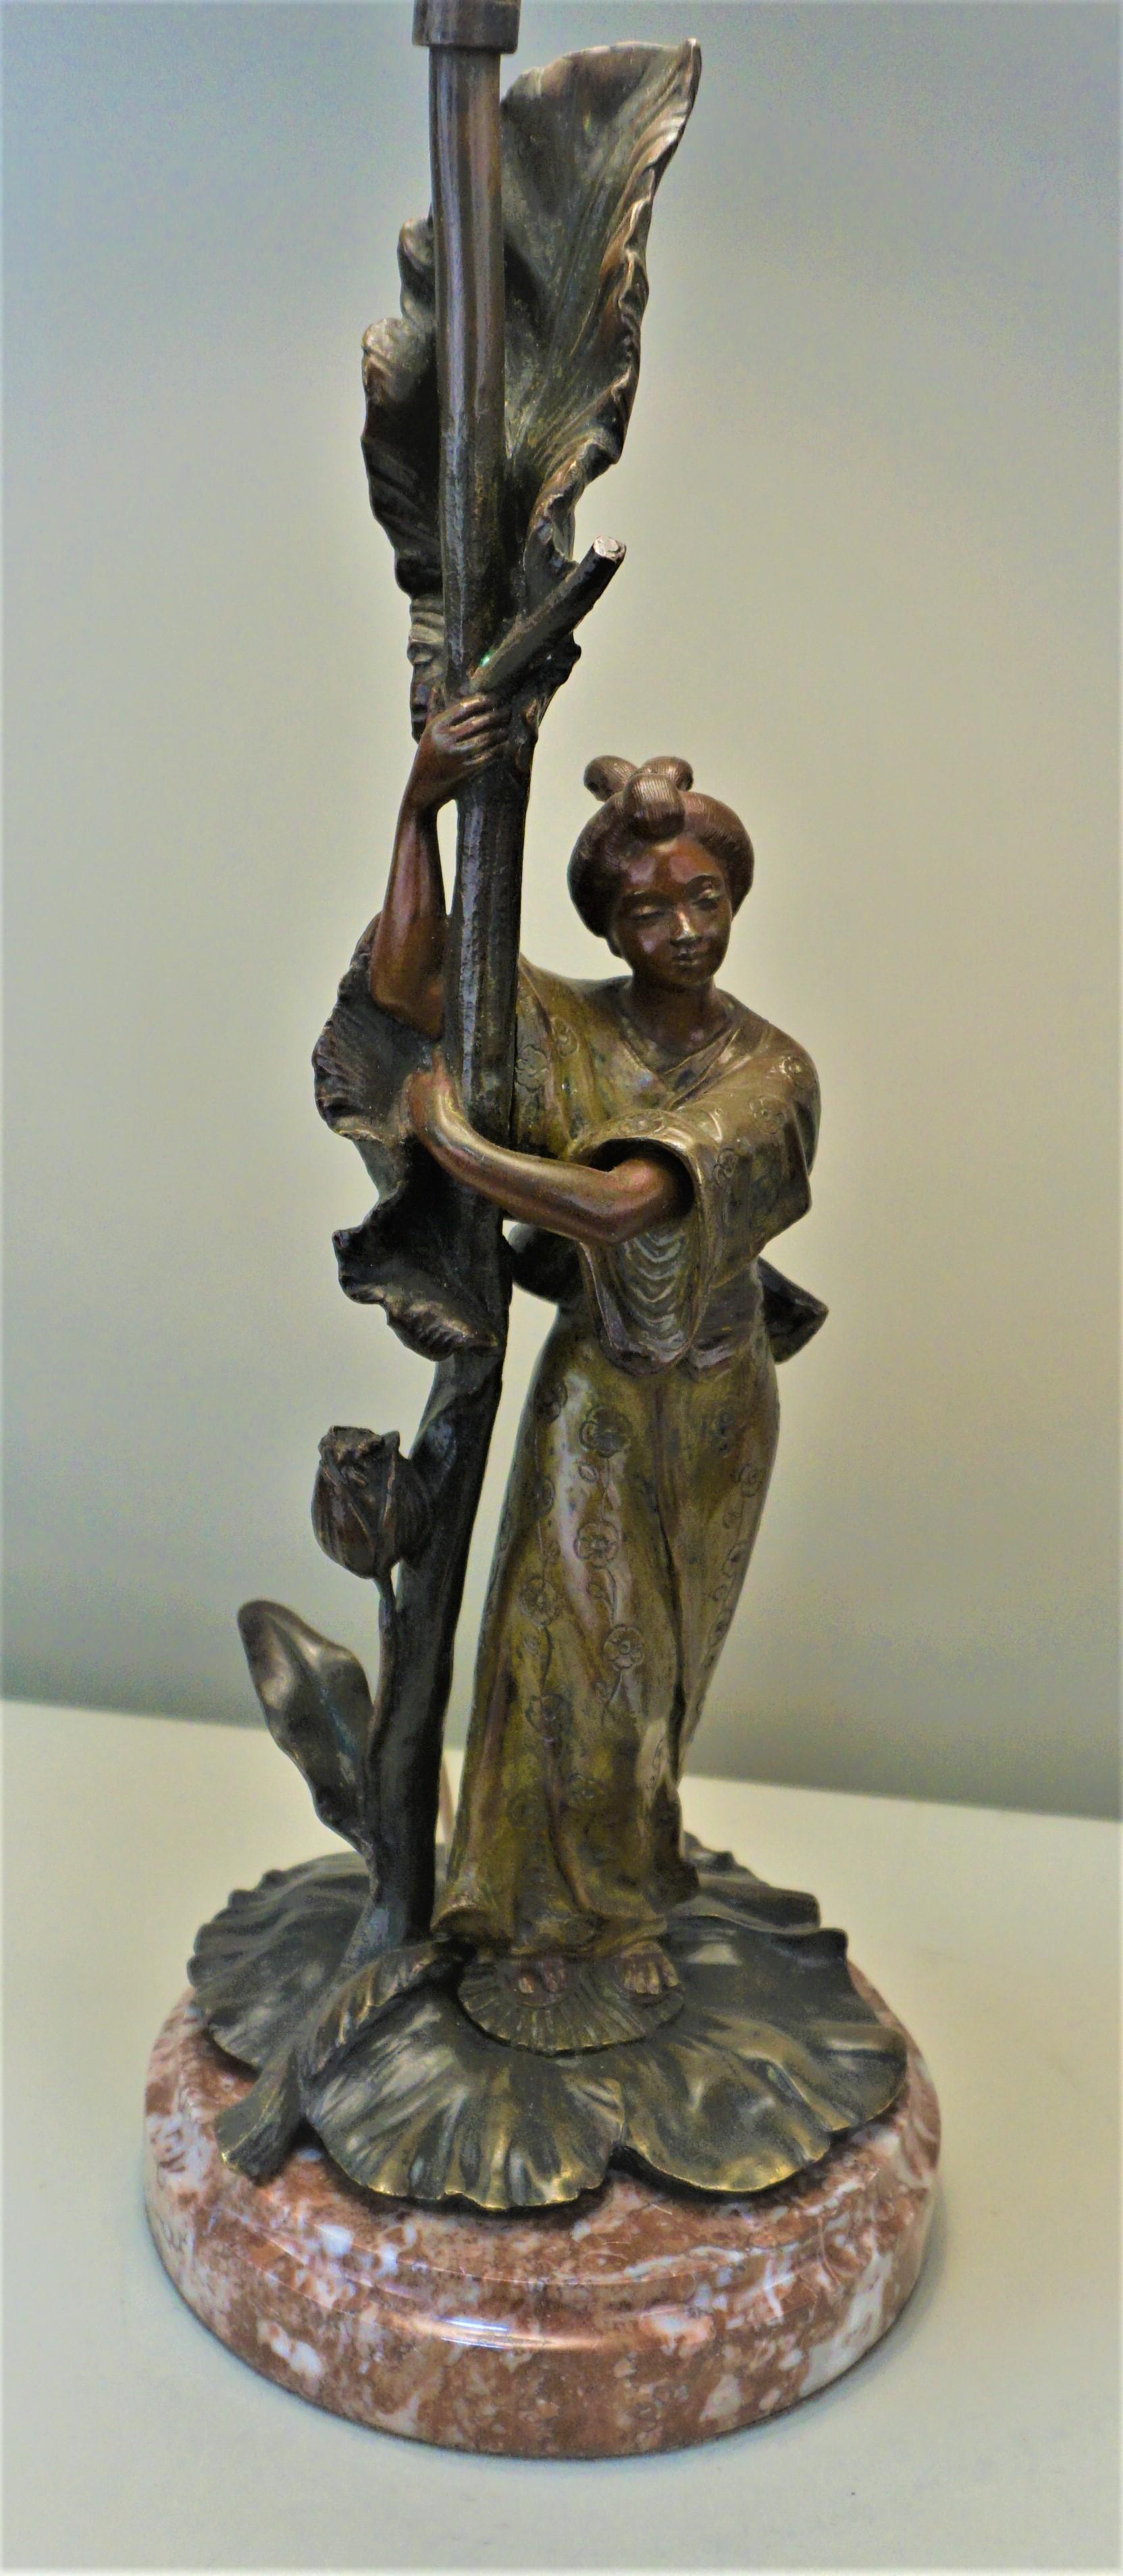 An Art Nouveau bronze table lamp with Japanese Geisha in Kimono dress, signed A Leblanc
Was purchased in France and rewired and fitted with silk lampshade.